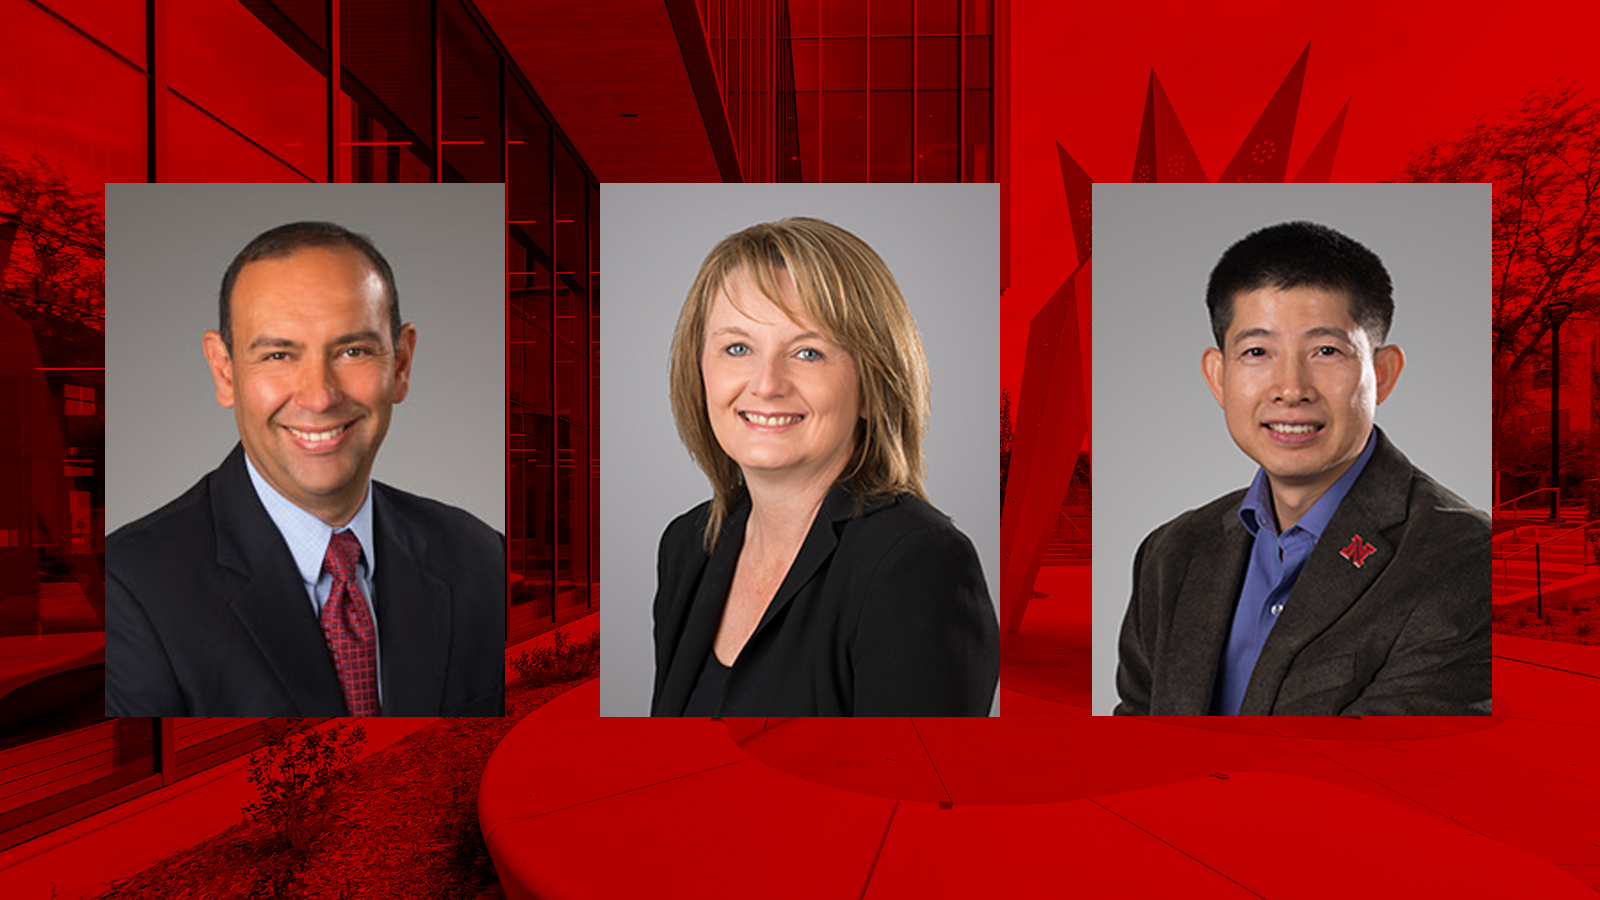 professional portraits of Gilbert Parra, Kristy Weissling and Jiangang Xia with red background image